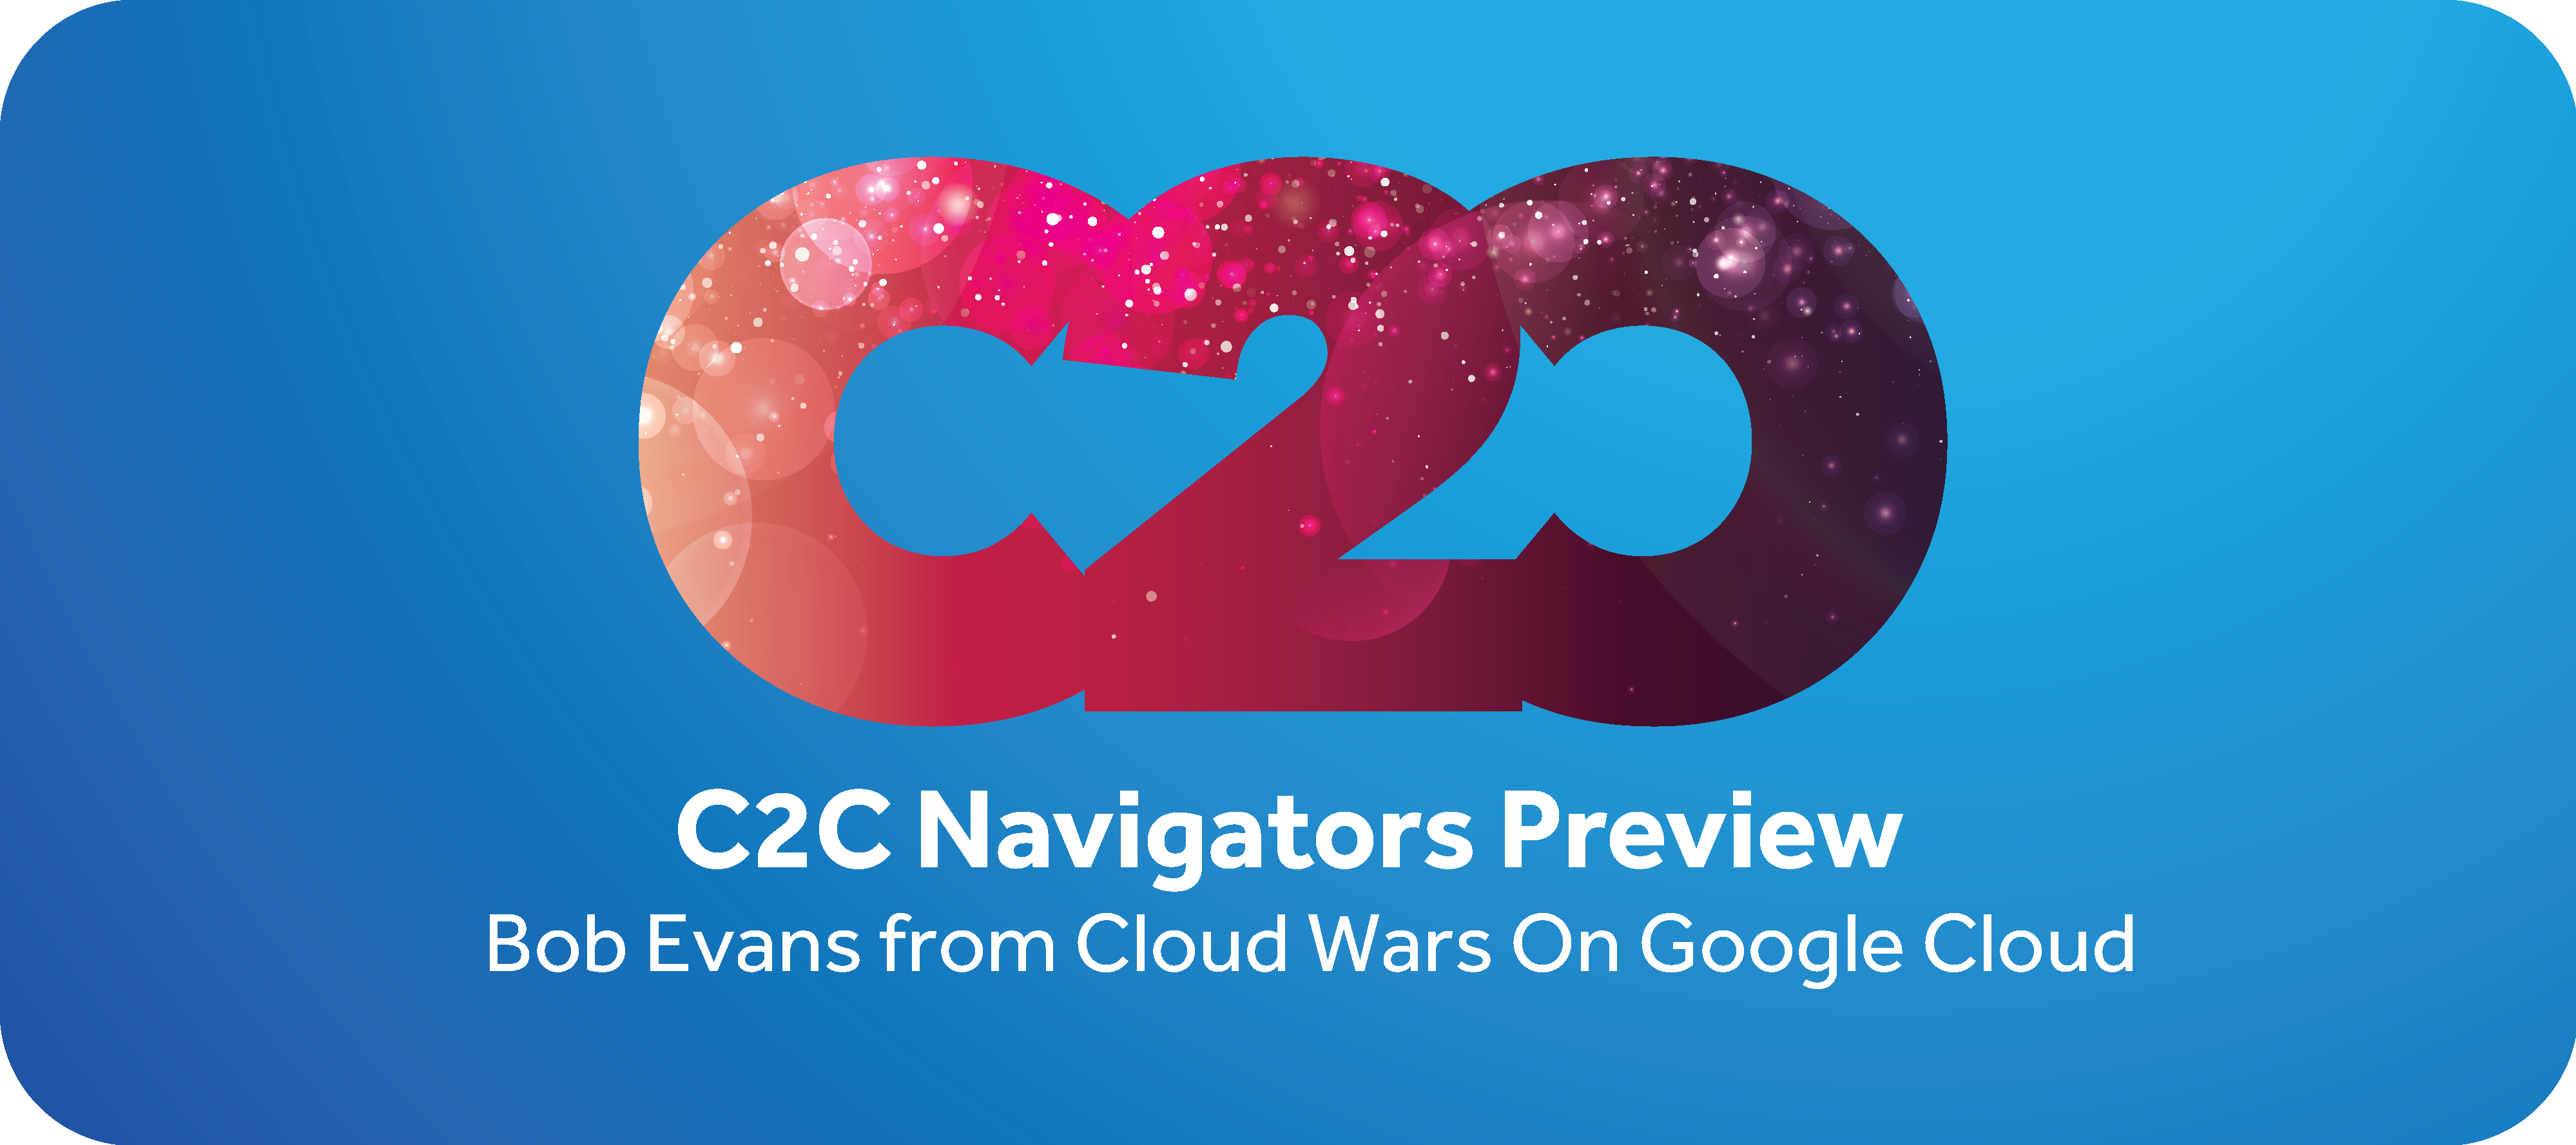 Navigator Preview: Bob Evans from Cloud Wars Joins C2C on March 2